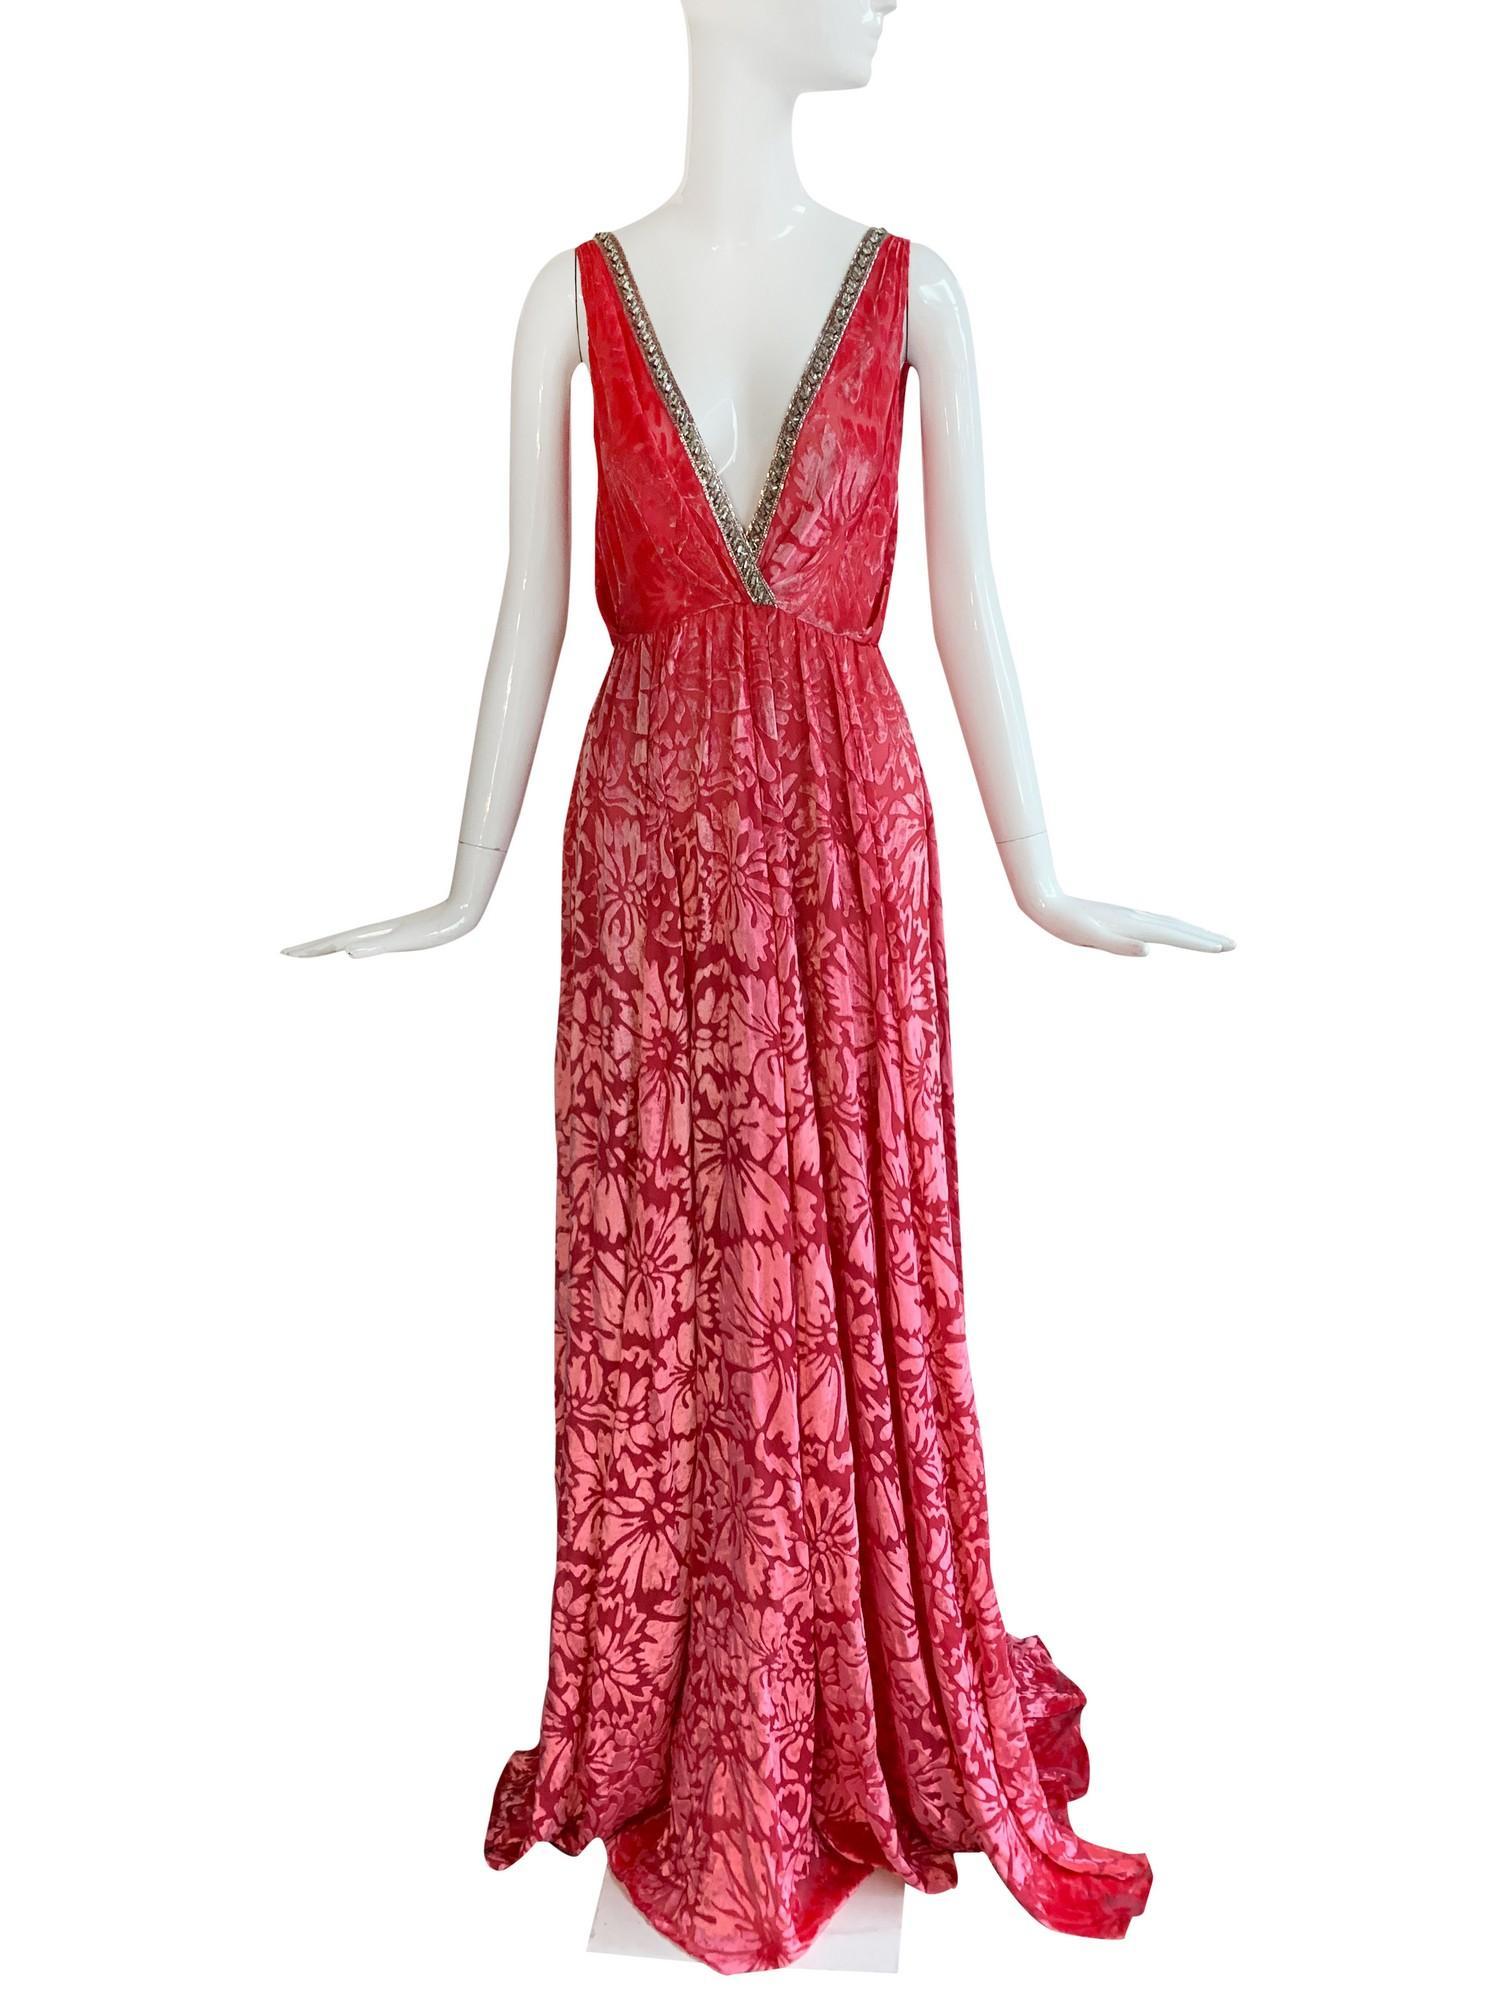 2010 F/W Dior by John Galliano pink devore velvet evening gown with plunging neckline and beaded/rhinestone trim at front neck and back. In excellent condition - gown was not shown on the runway. No size tag - please consult measurements.
Bust -